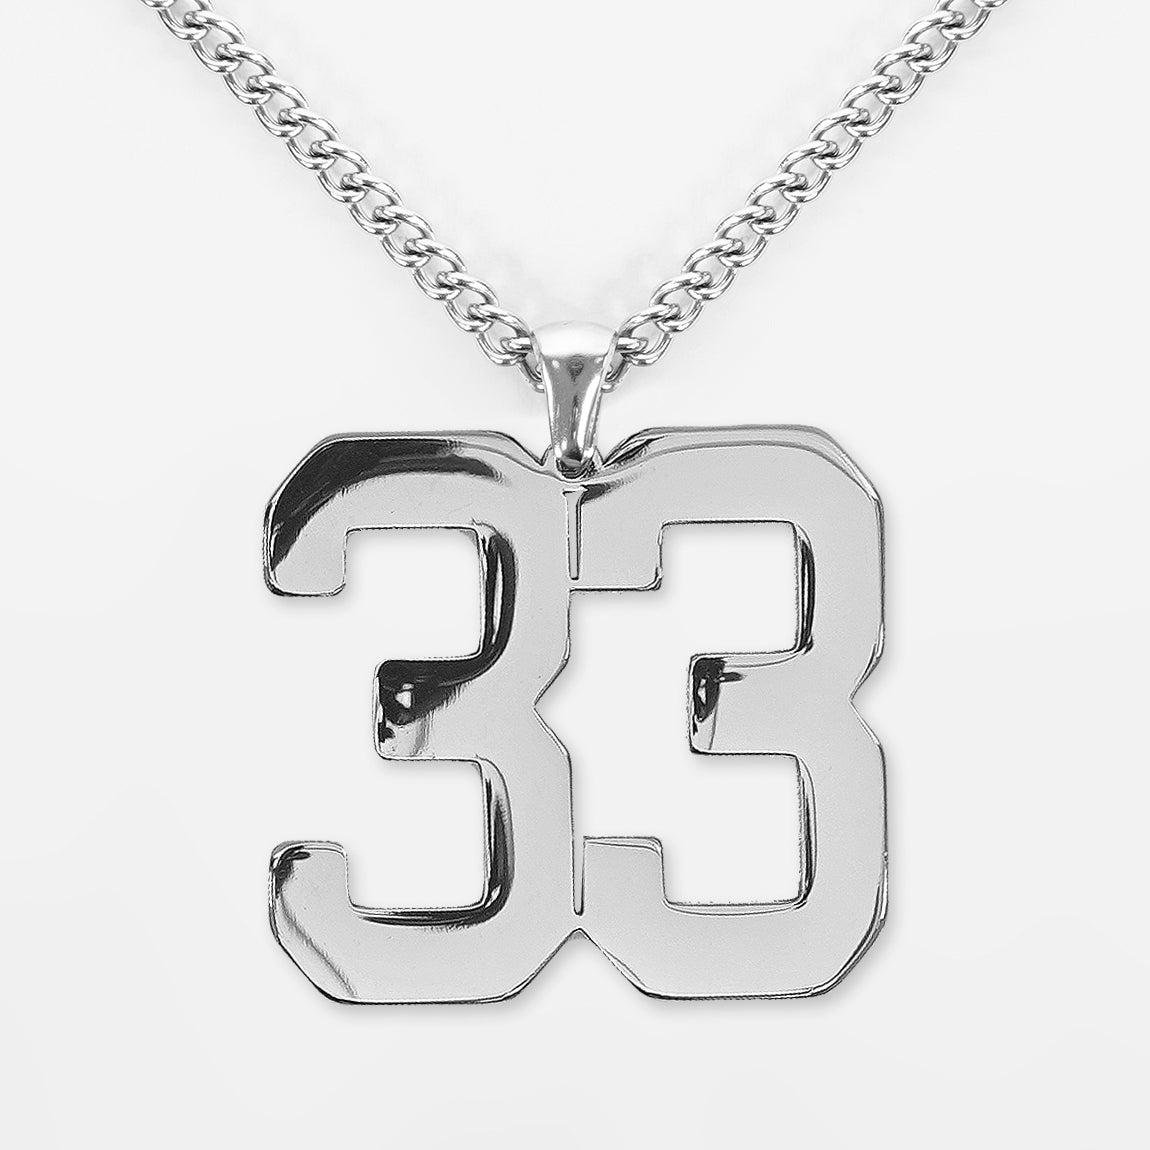 33 Number Pendant with Chain Necklace - Stainless Steel